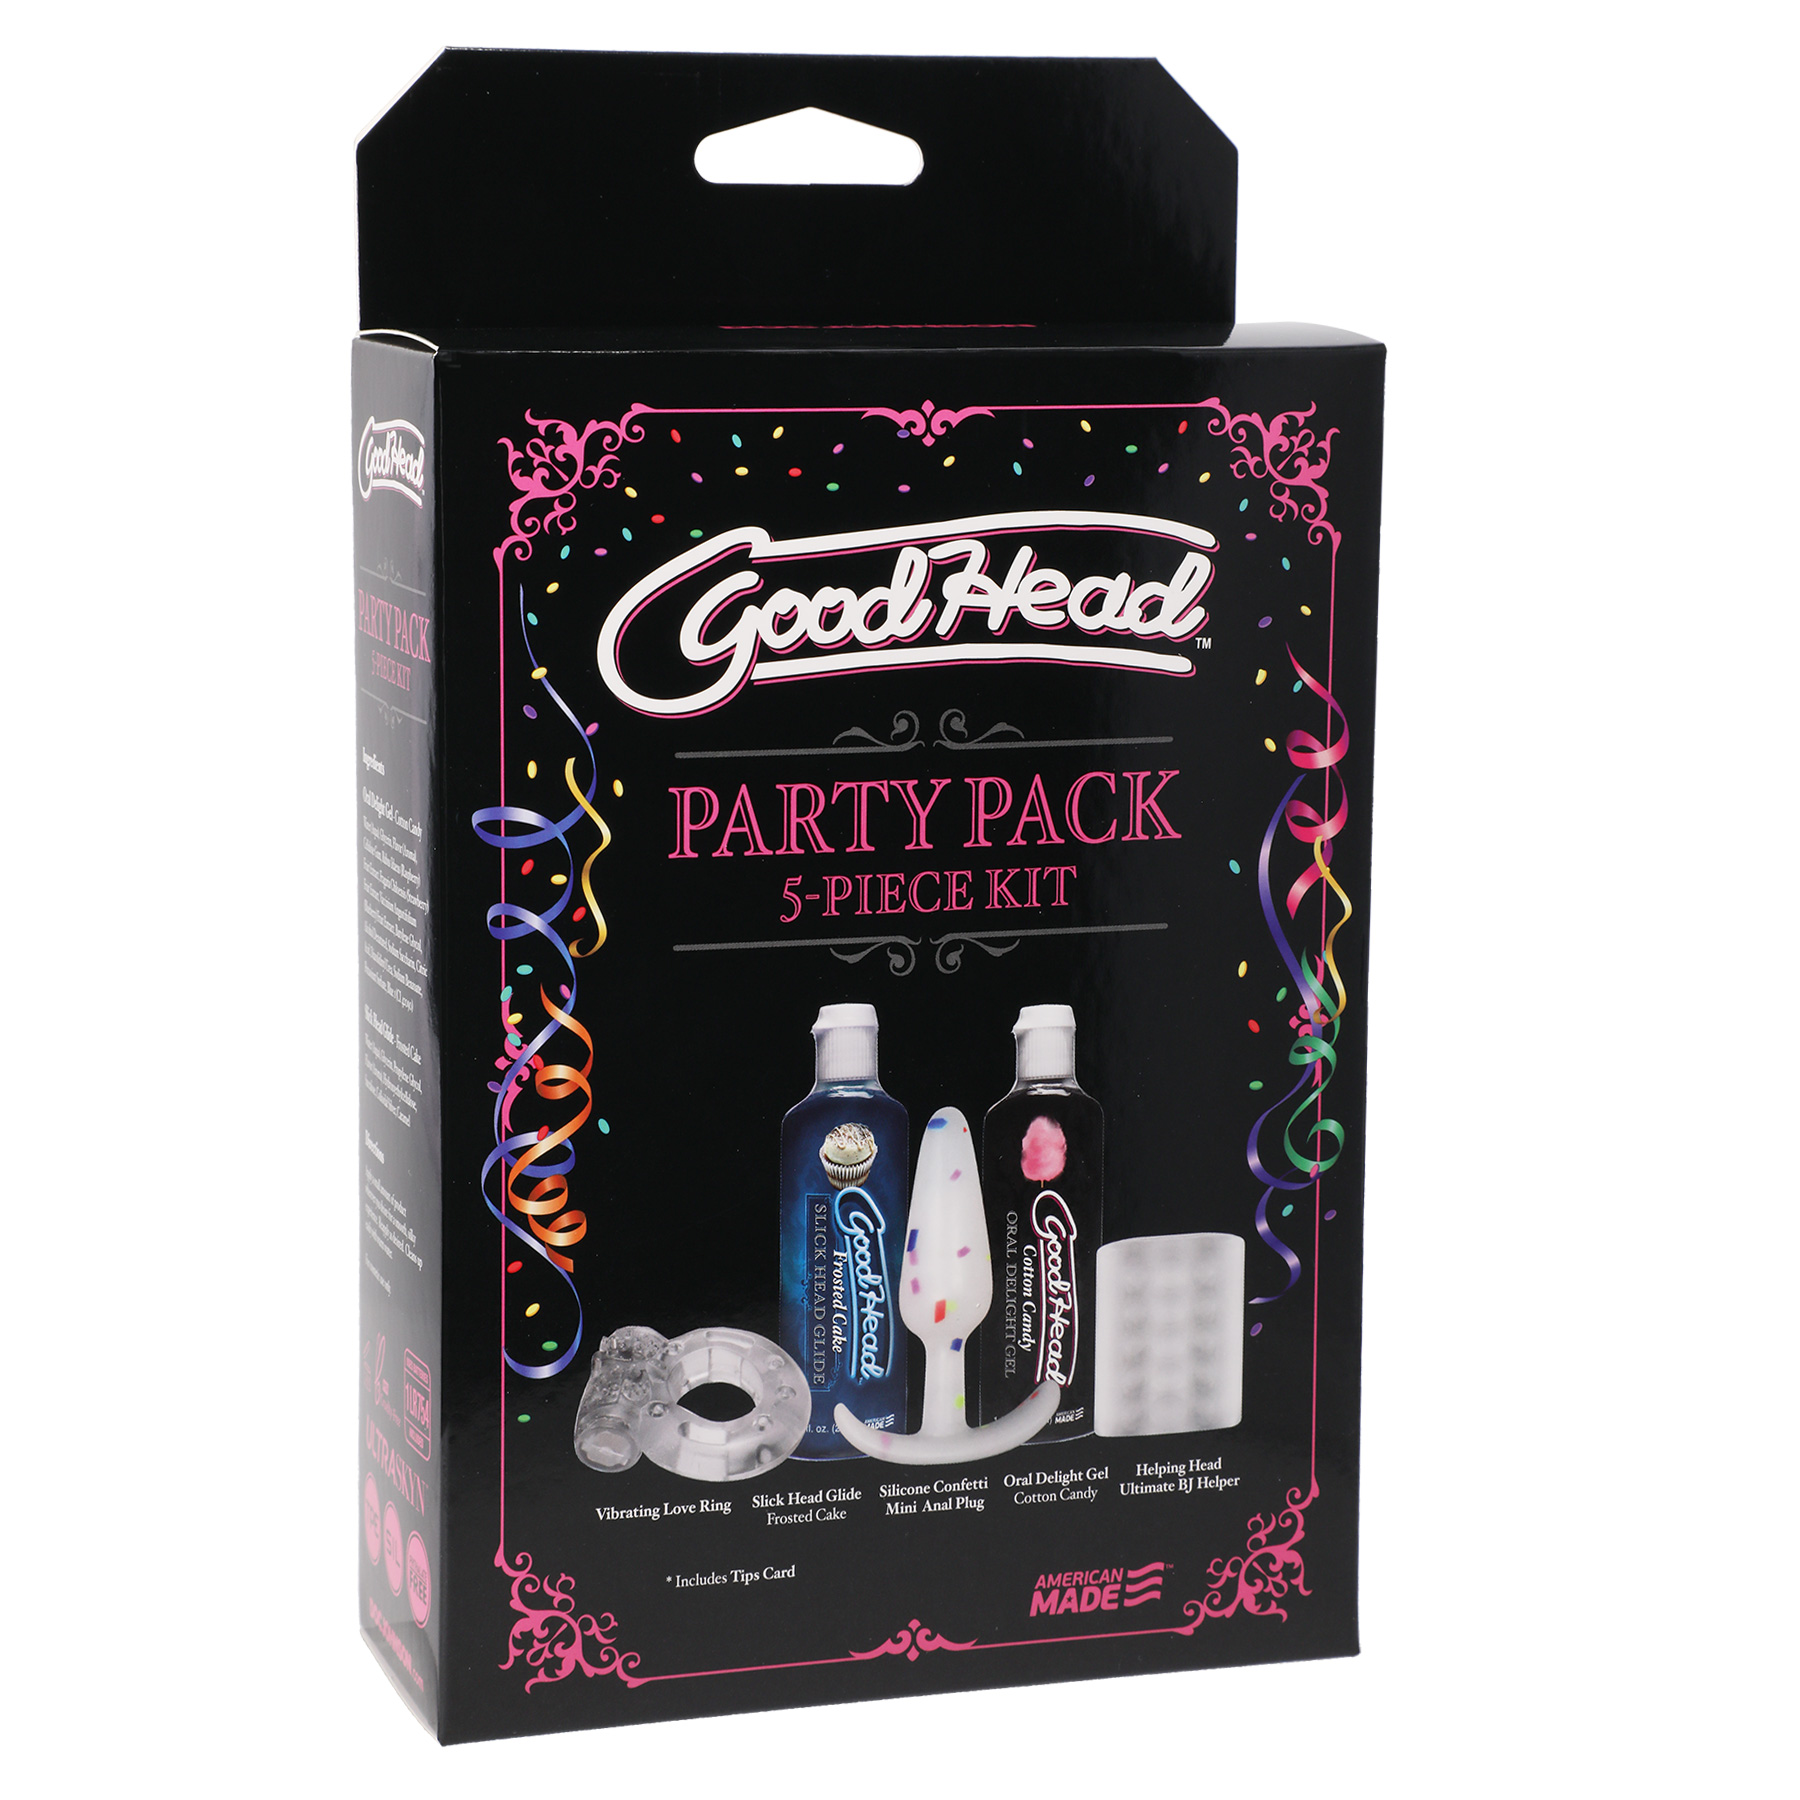 goodhead party pack  piece kit 